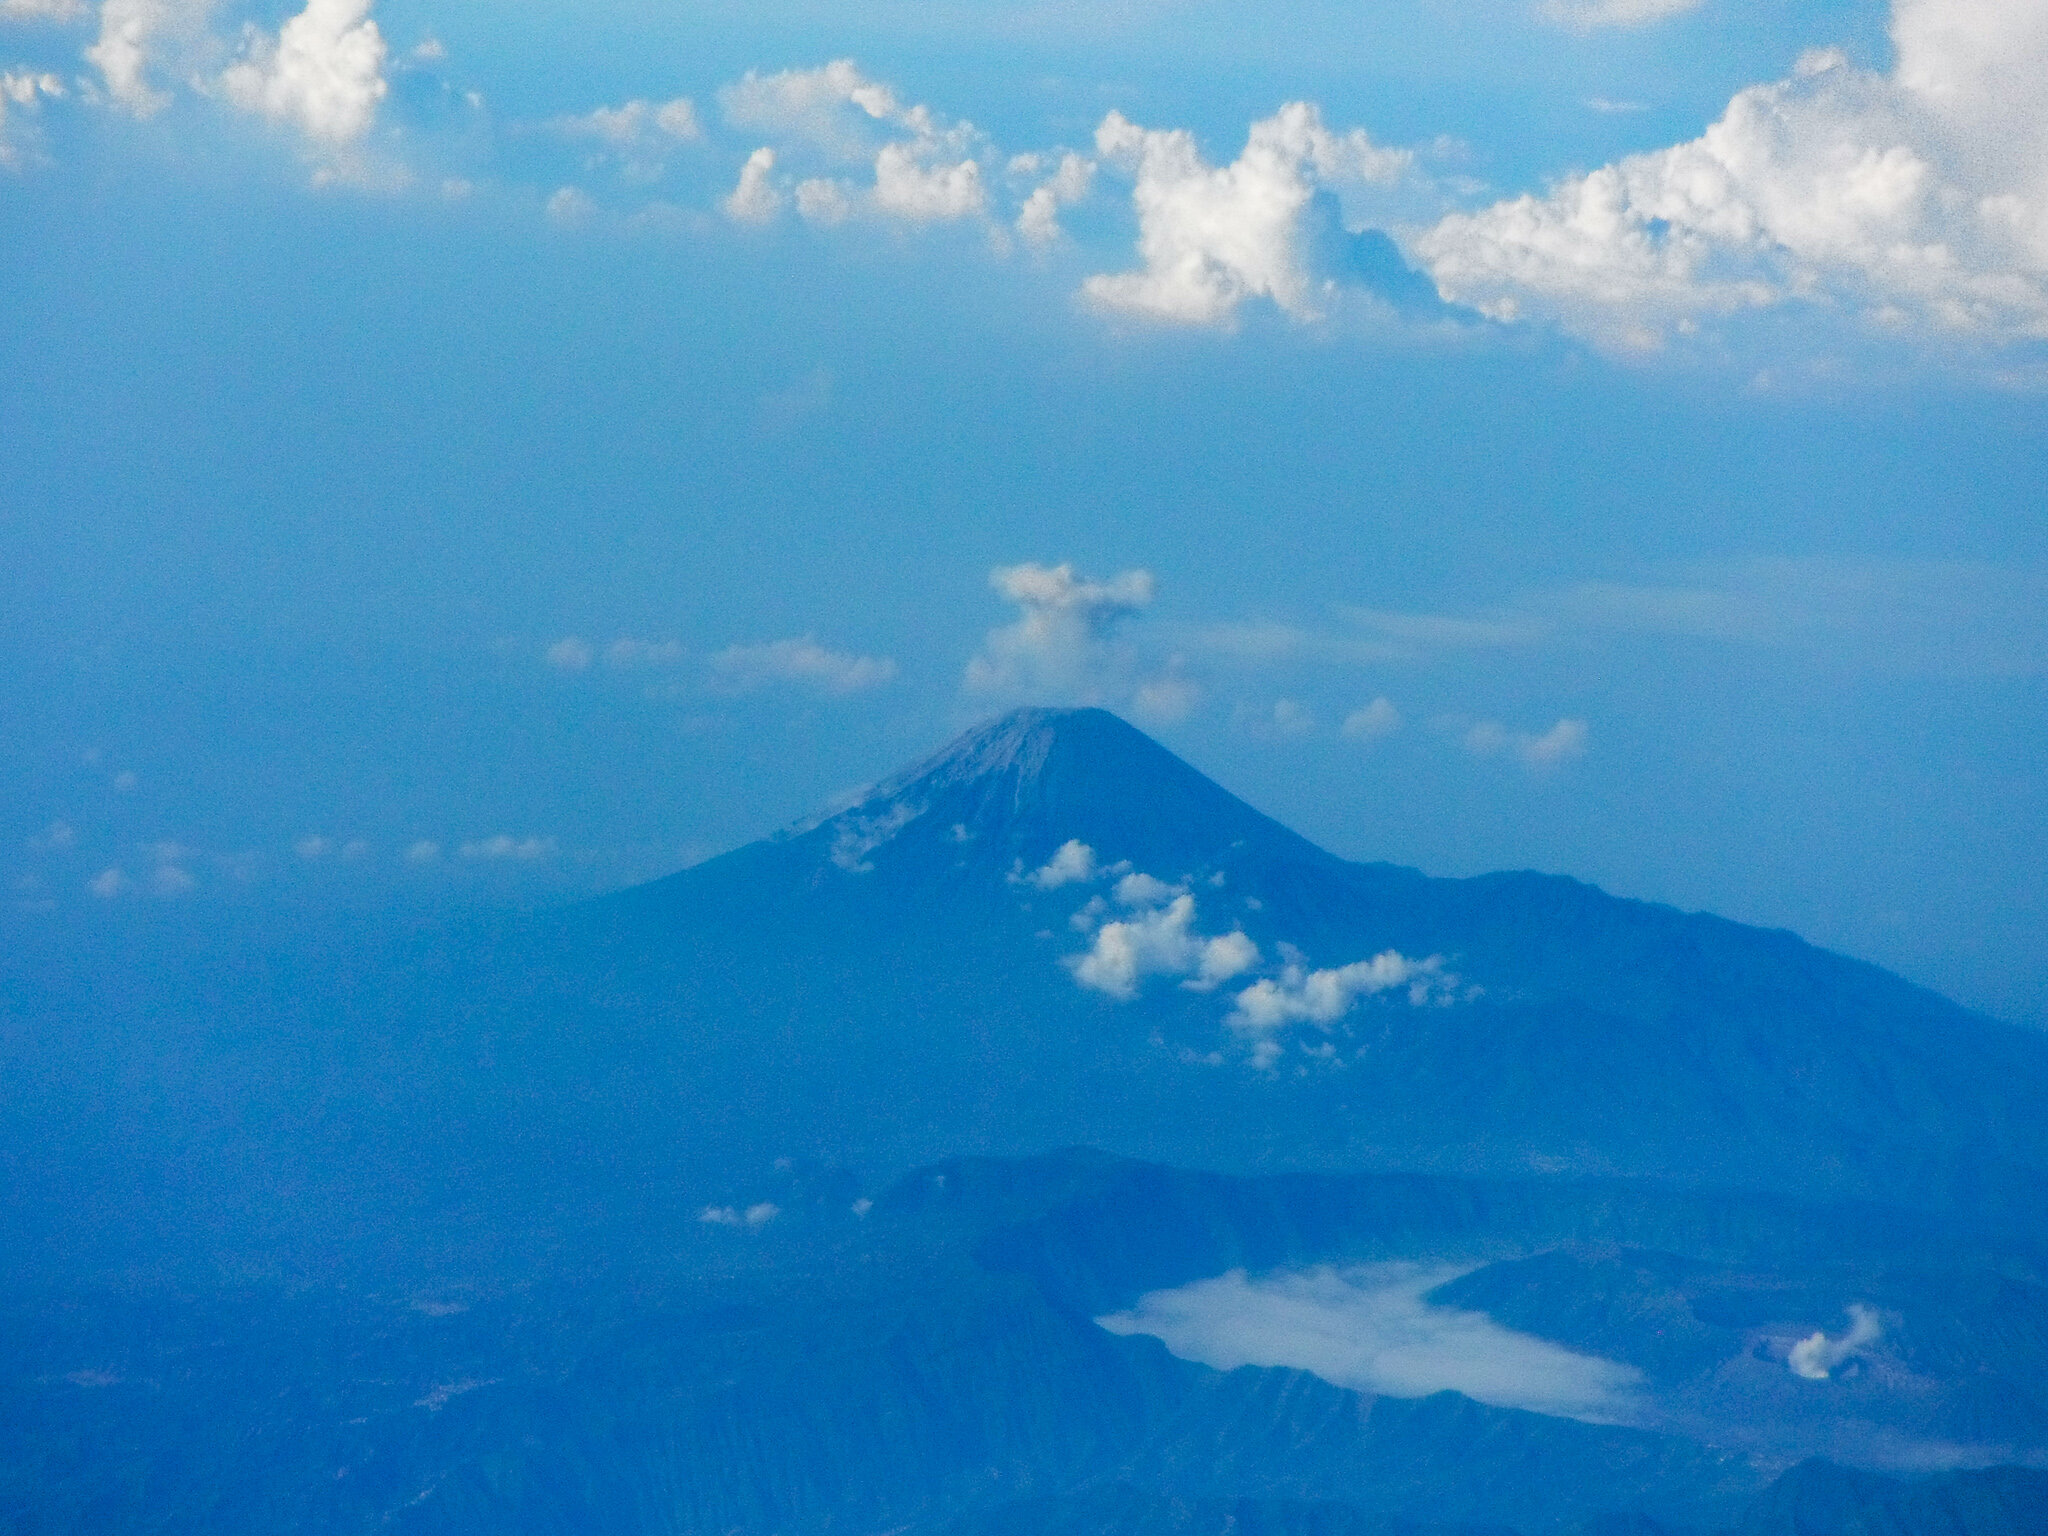  One of many volcanoes on Indonesia 